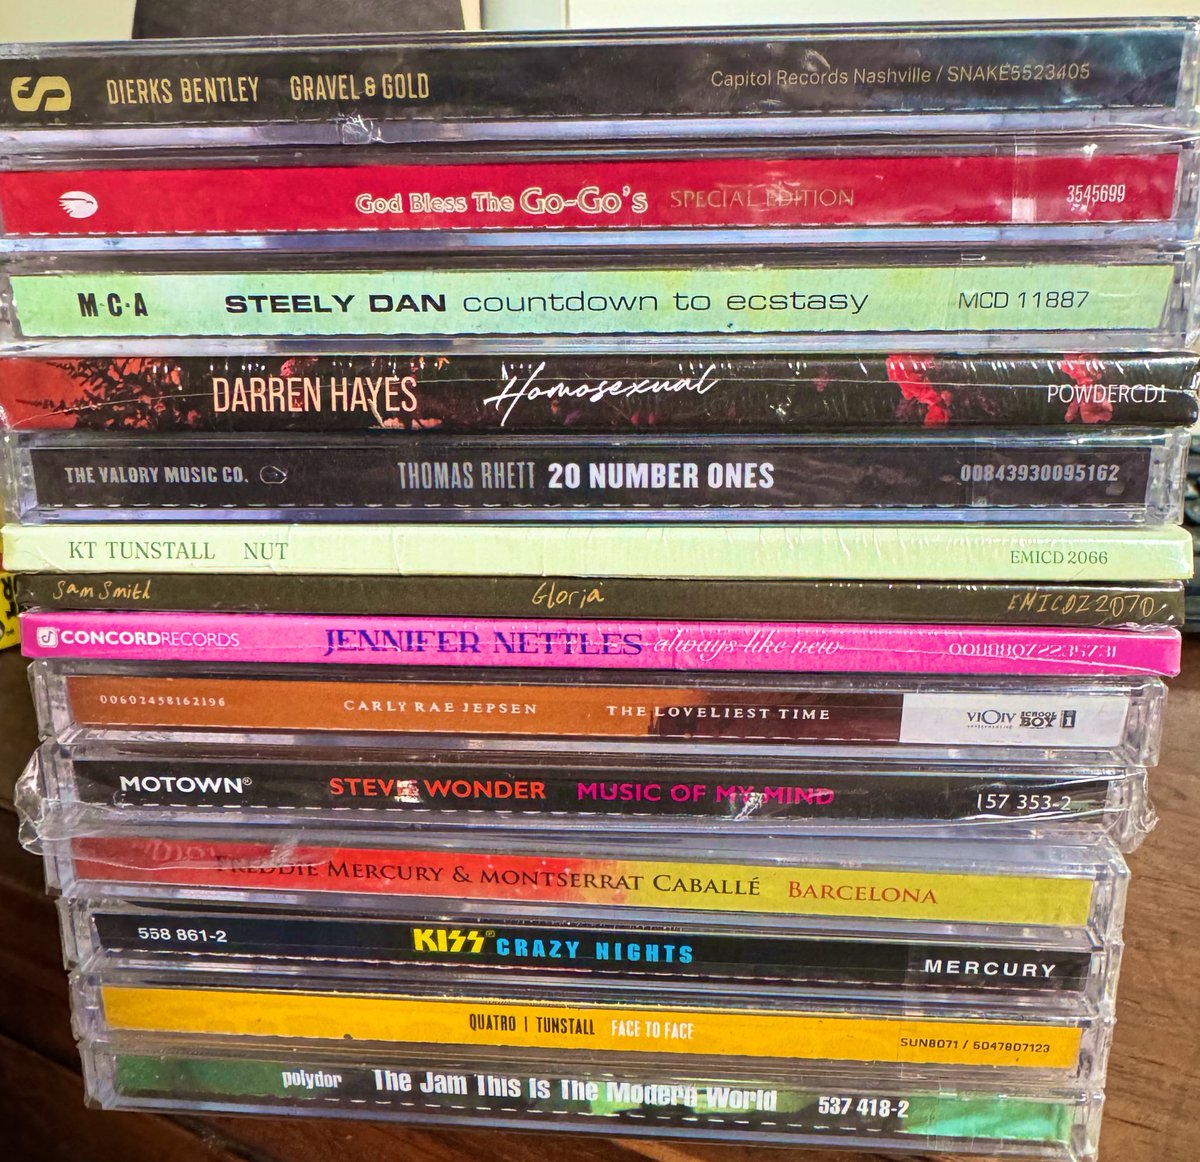 #NewAdditions to the #record collection courtesy of @hmvtweets #Deal50 sale … including albums from
@carlyraejepsen @darrenhayes @DierksBentley @KTTunstall @belindacarlisle and a few more yet to arrive!